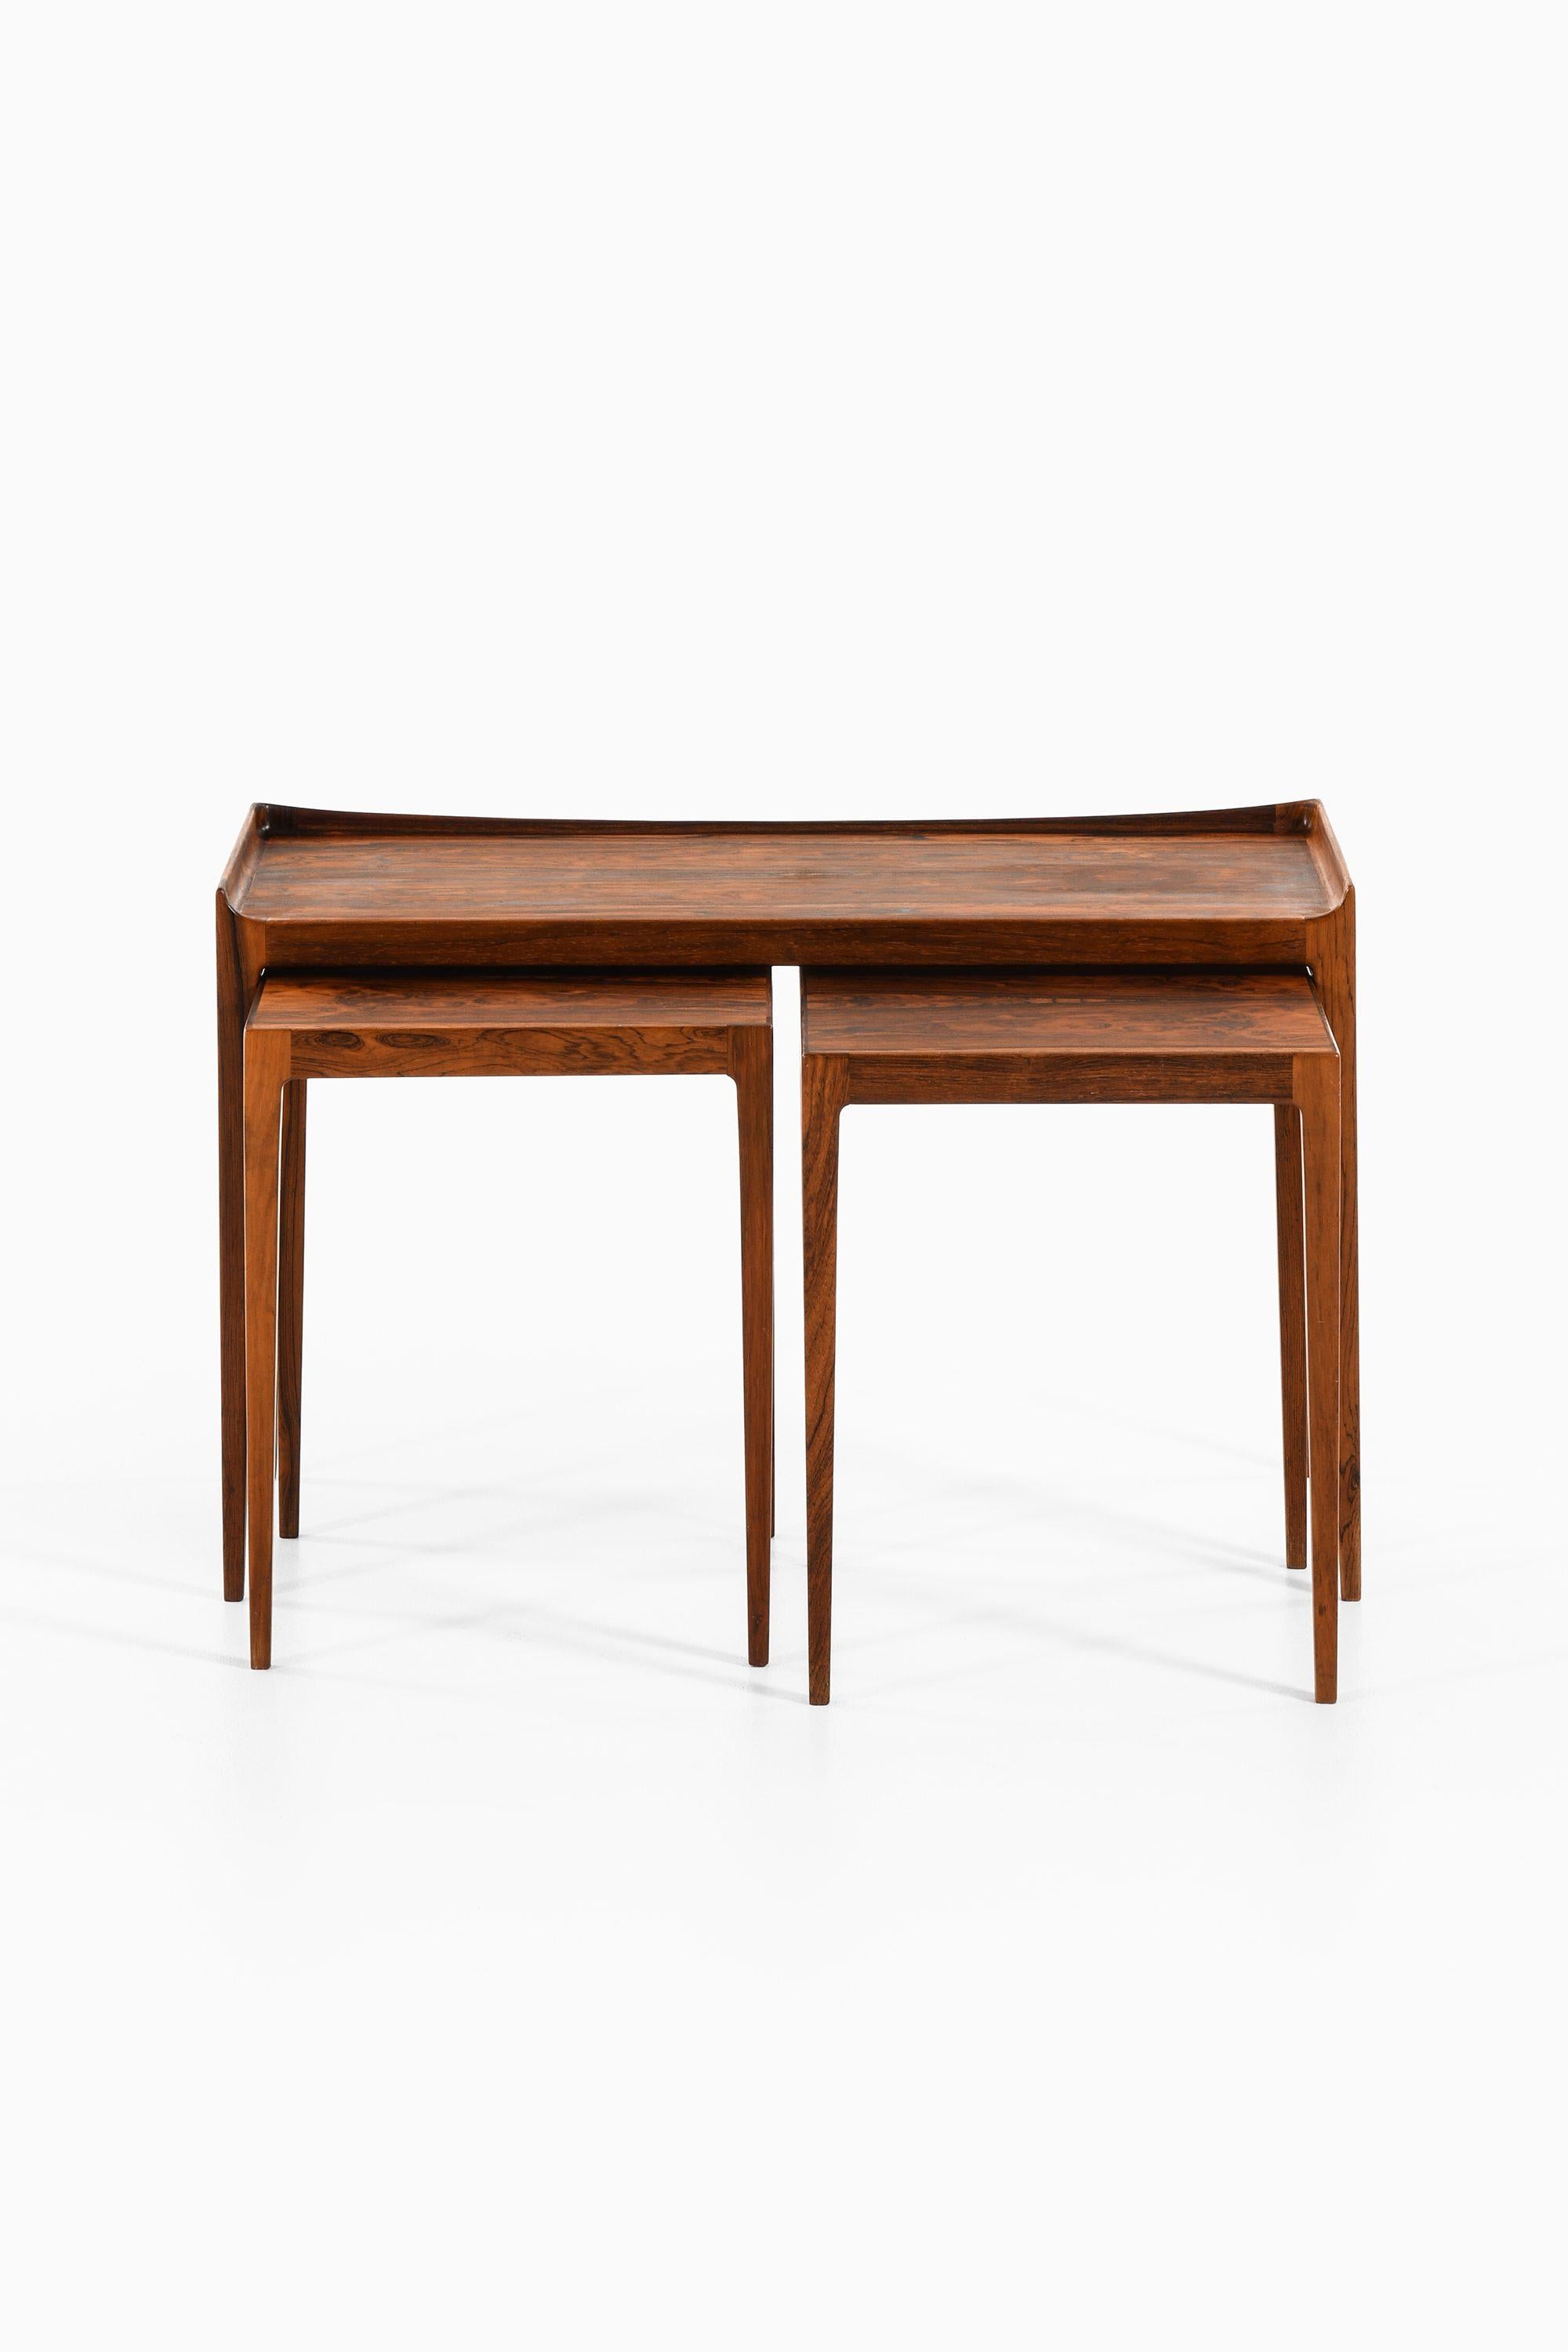 Nesting Tables in Rosewood by Kurt Østervig, 1960's

Additional Information:
Material: Rosewood
Style: Mid century, Scandinavian
Produced by Jason møbler in Denmark
Dimensions (W x D x H): 80 x 36 x 50.5 cm
Condition: Good vintage condition, with